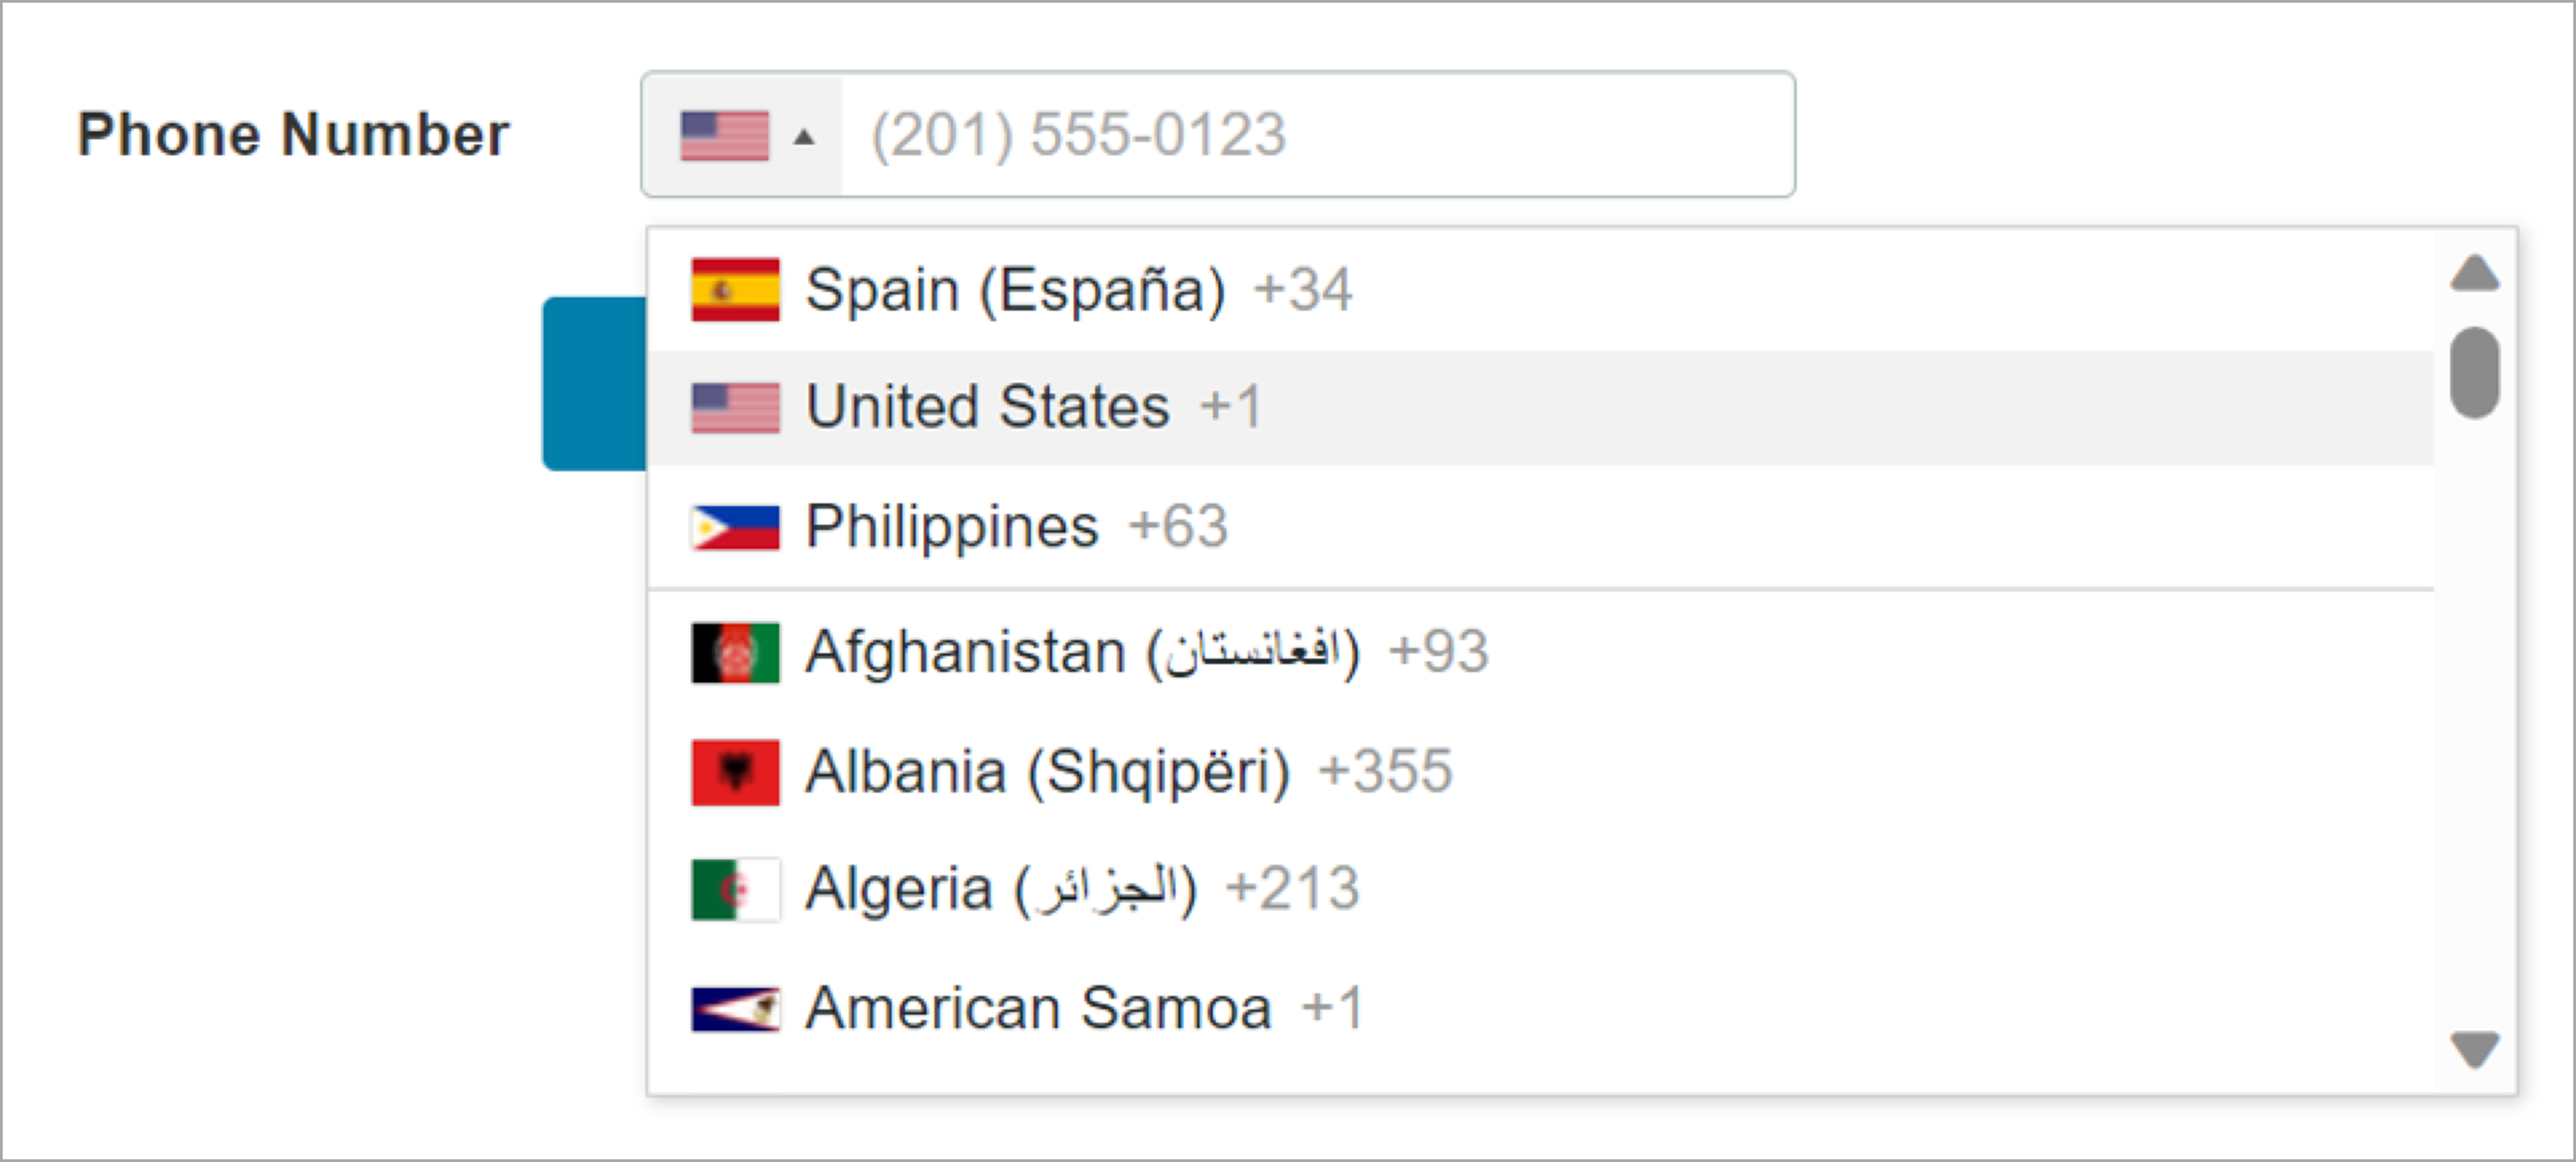 Sample Phone Number field with an active dropdown list showing flags of countries and the related country codes.